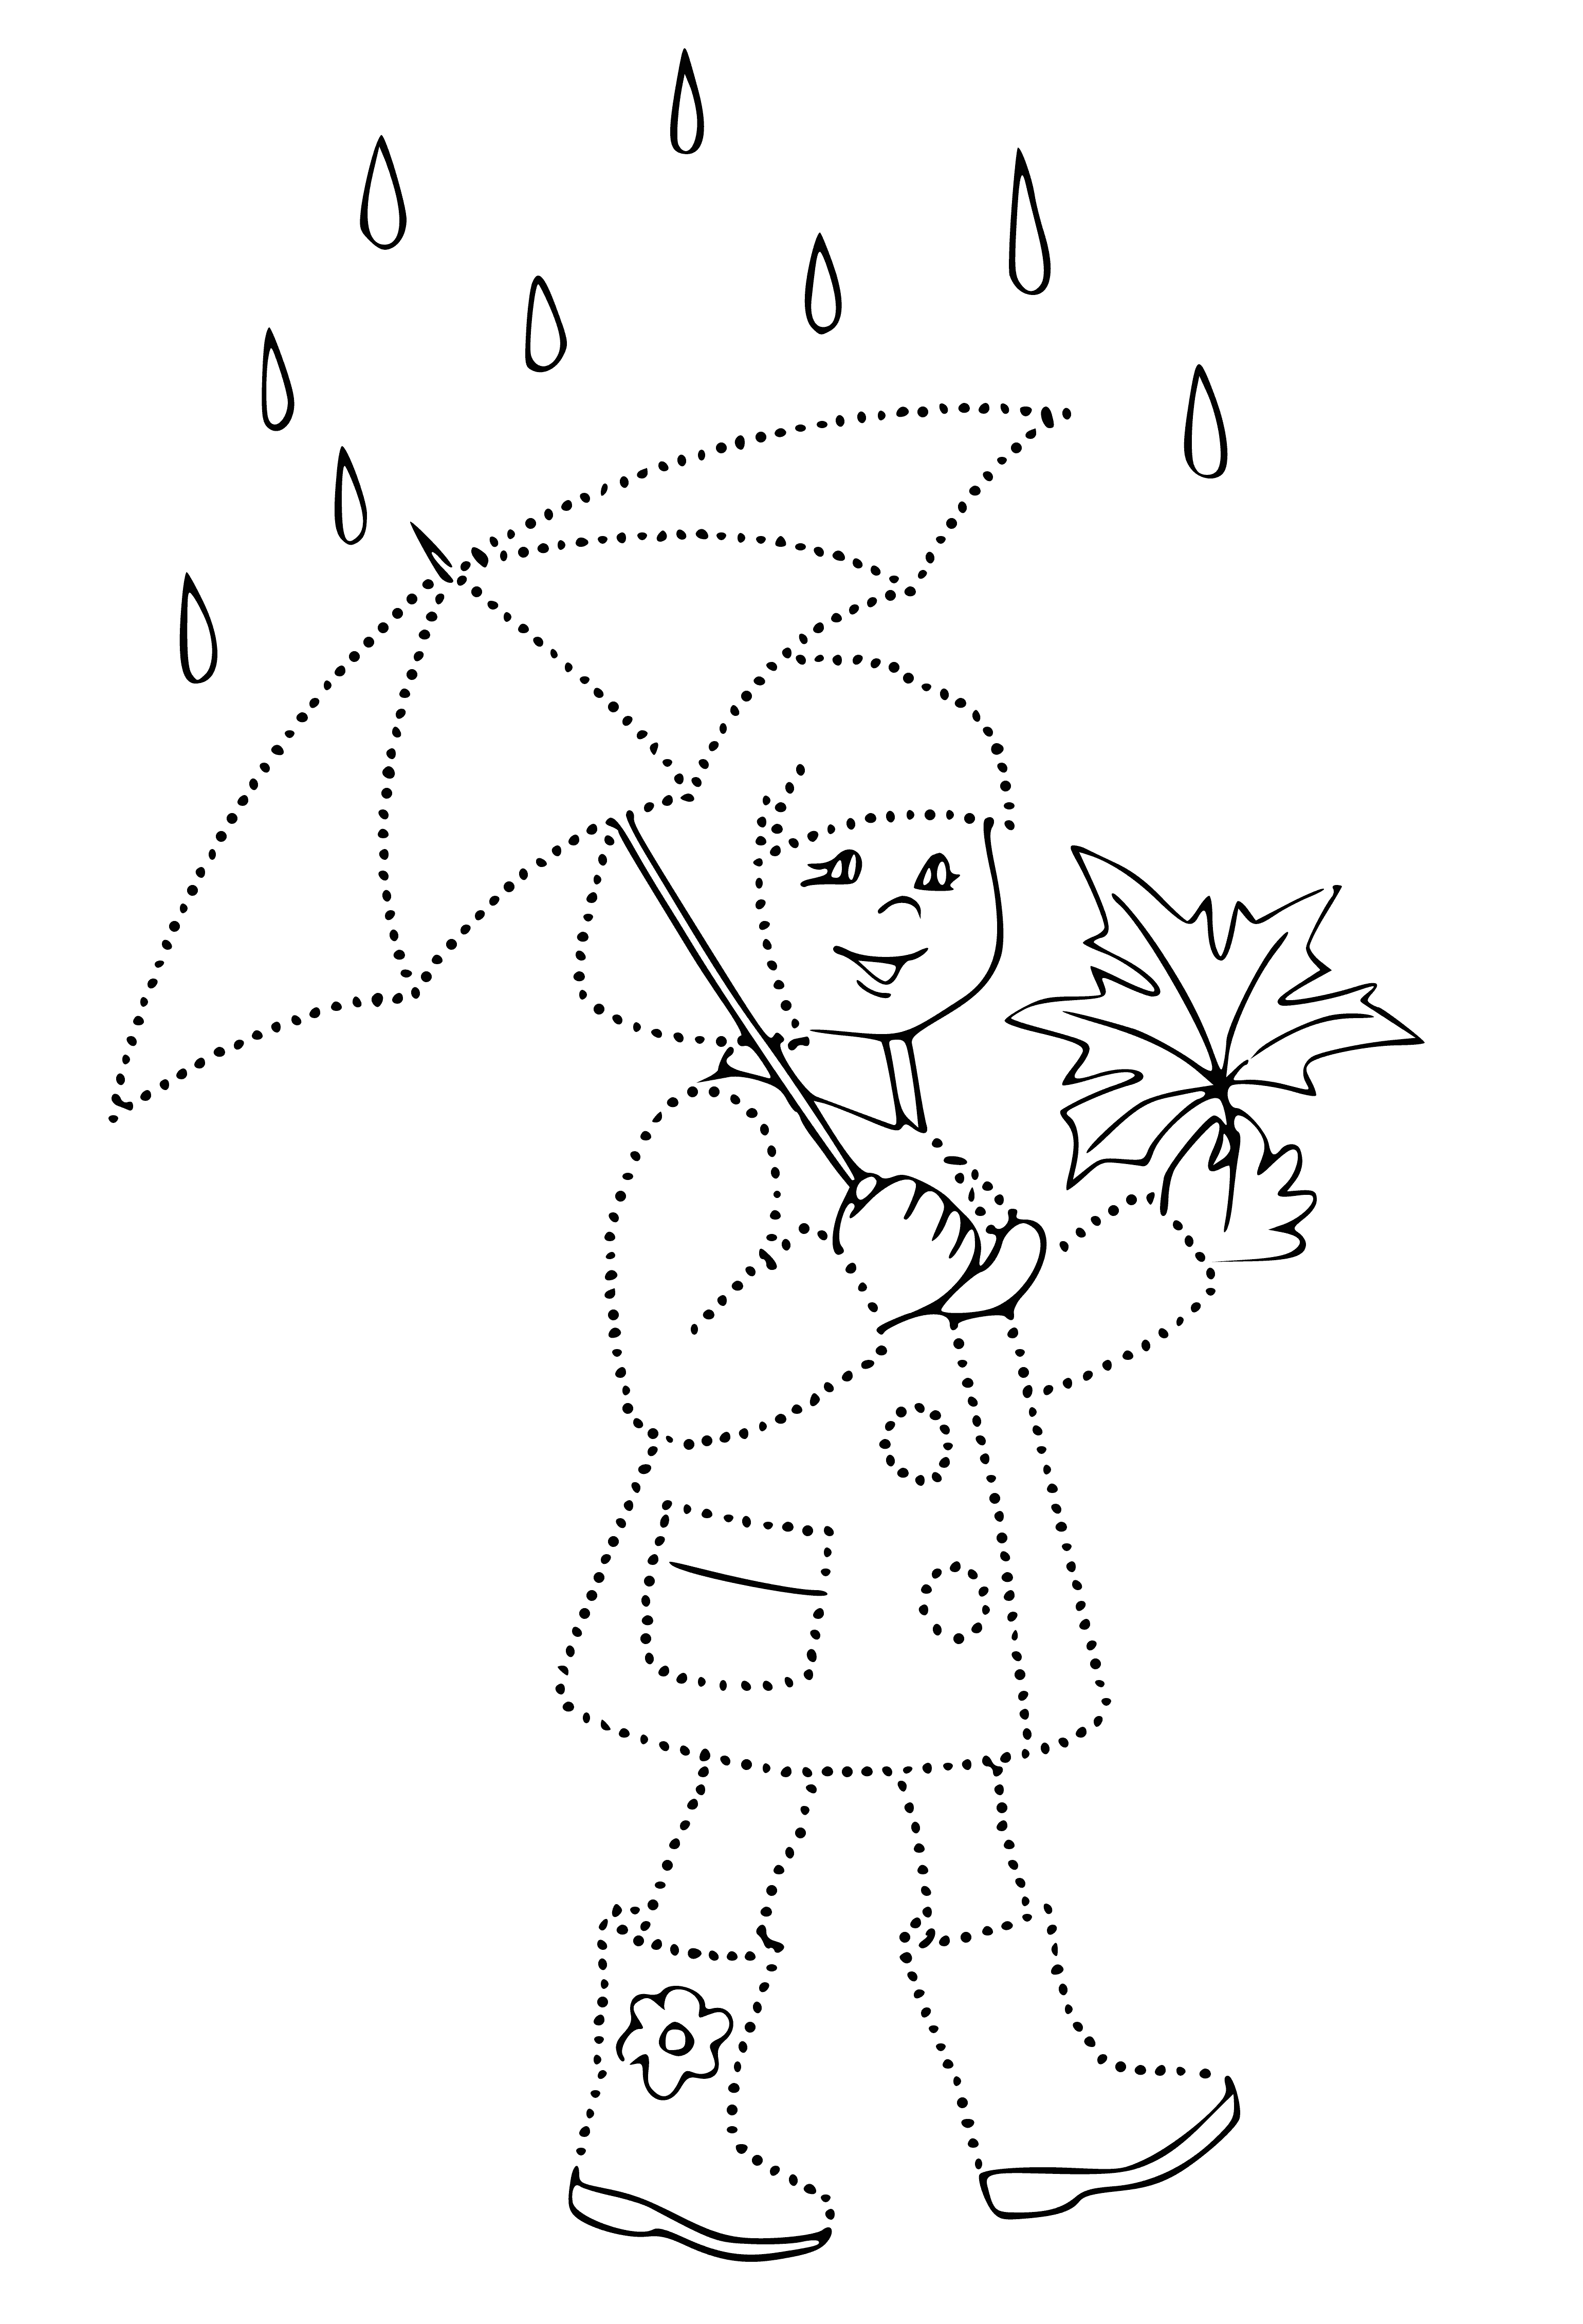 Girl under an umbrella coloring page